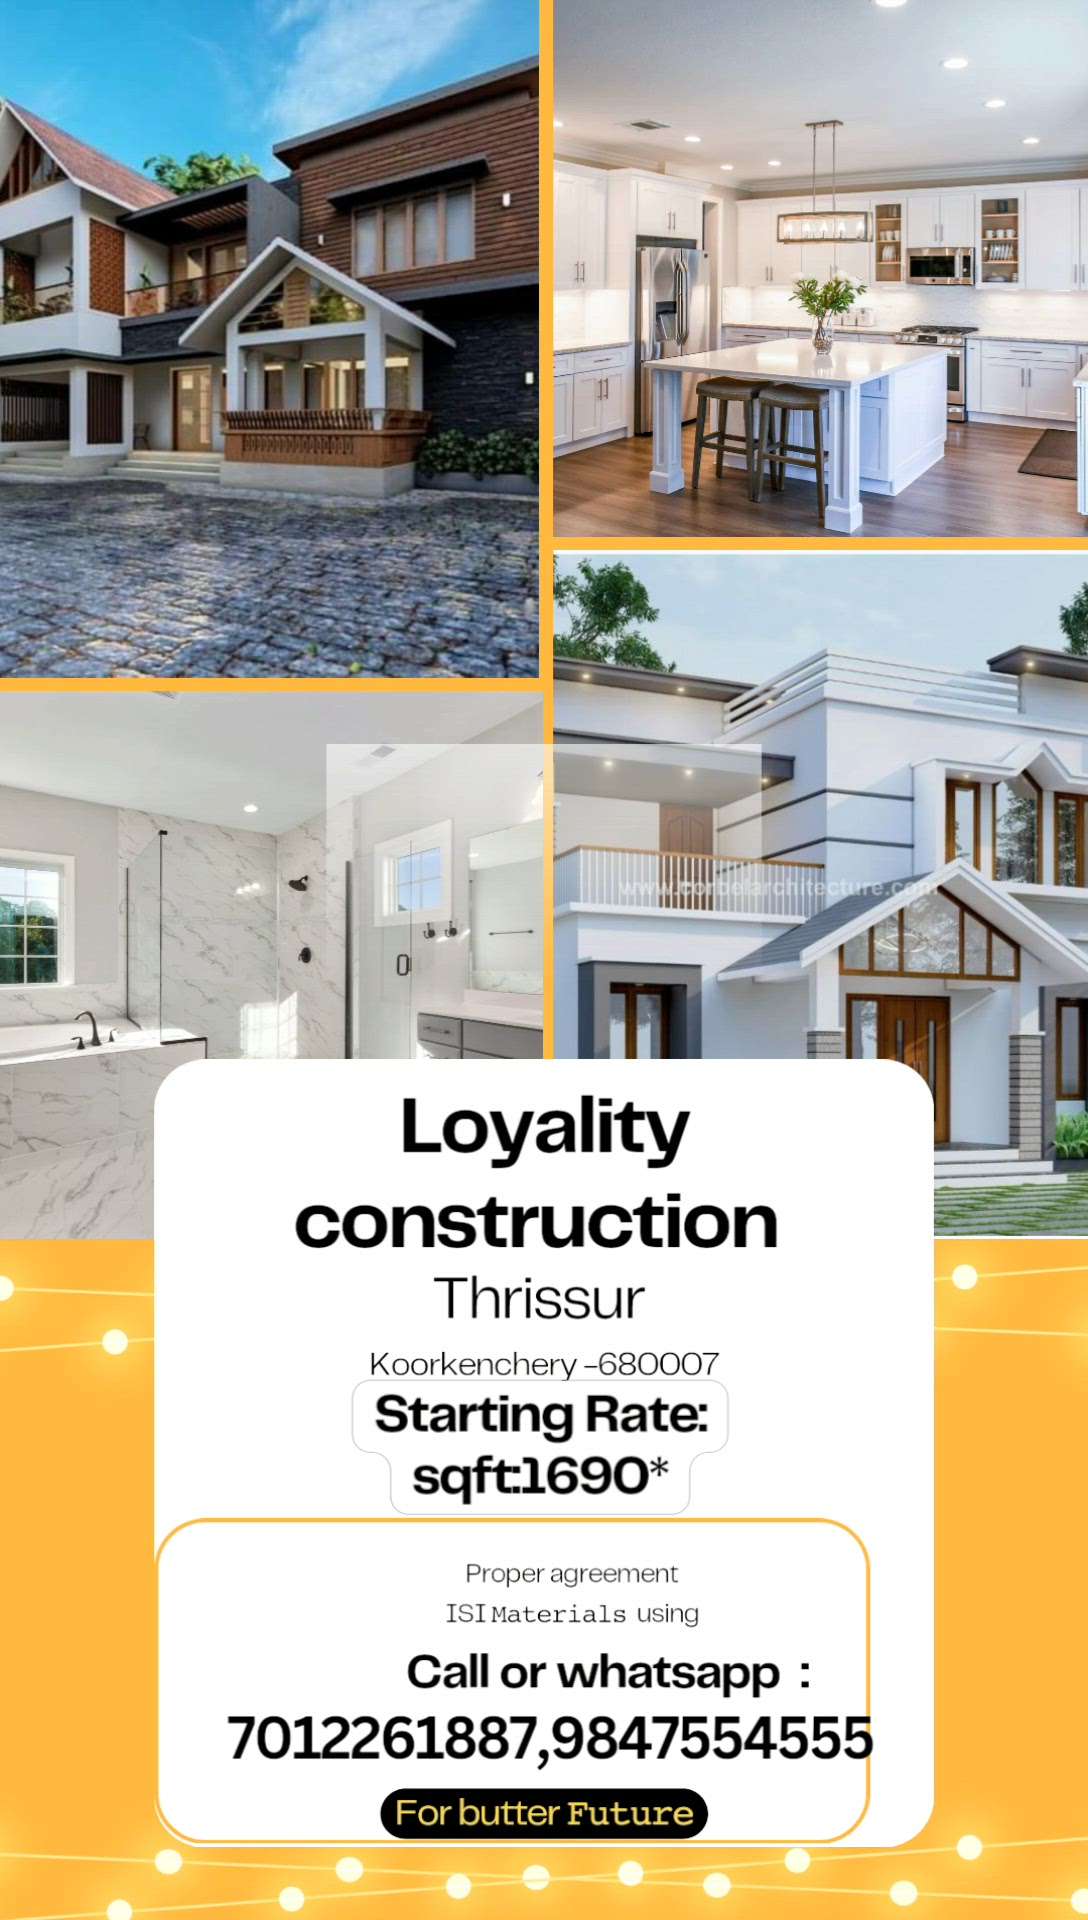 Loyalty construction Renovation Thrissur koorkenchery call or whatsapp:7012261887